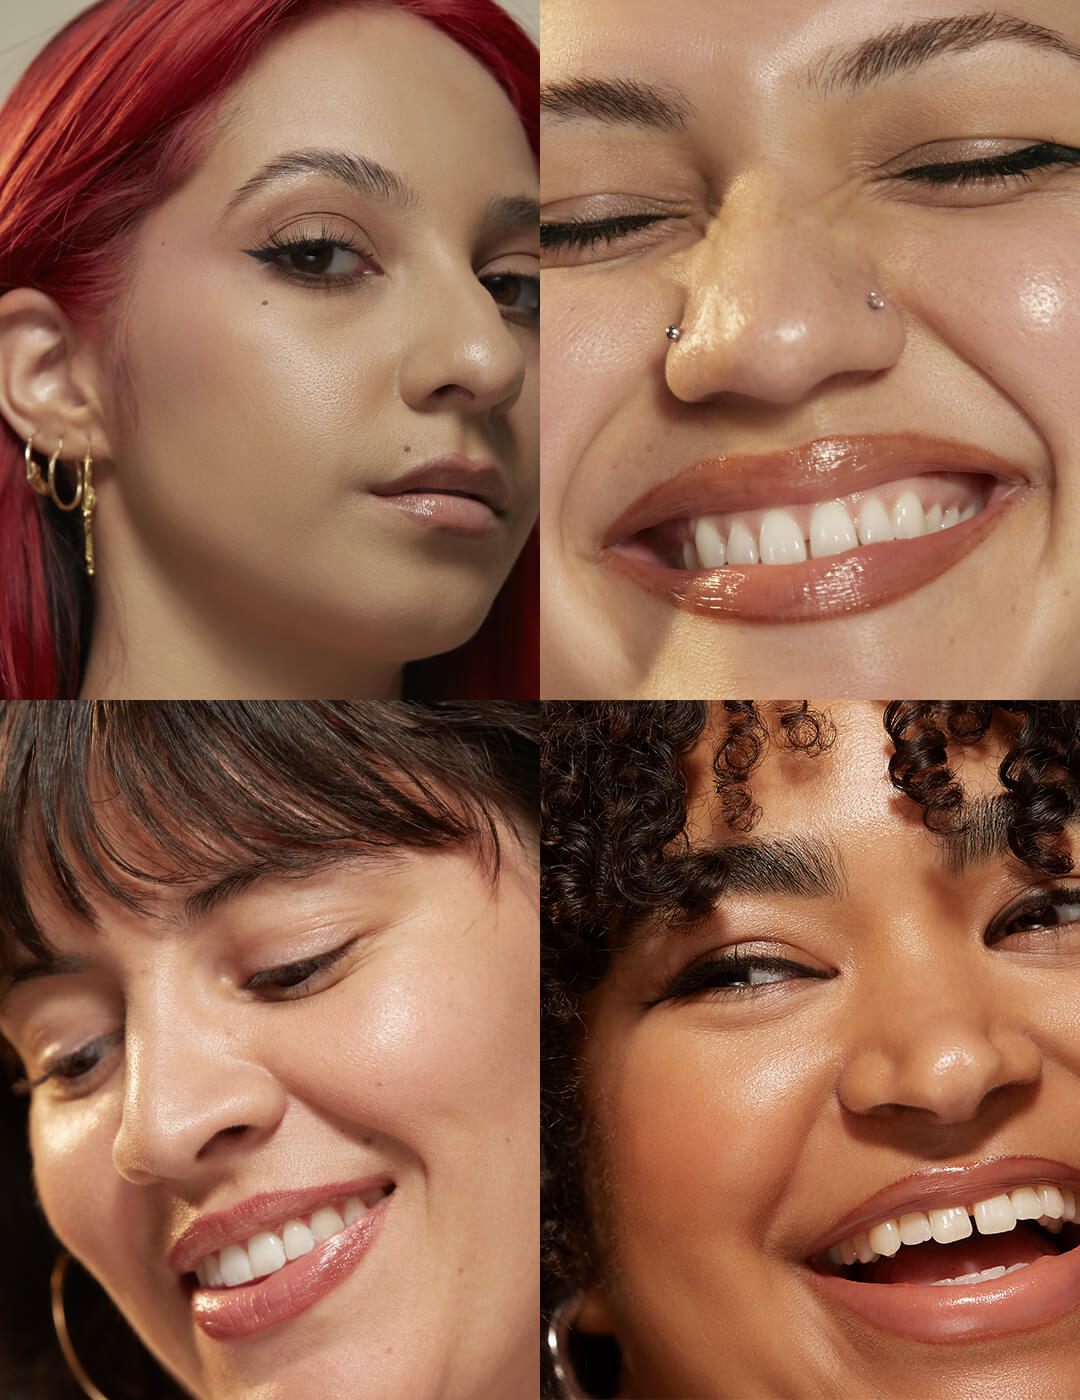 Collage image of portraits of smiling young women